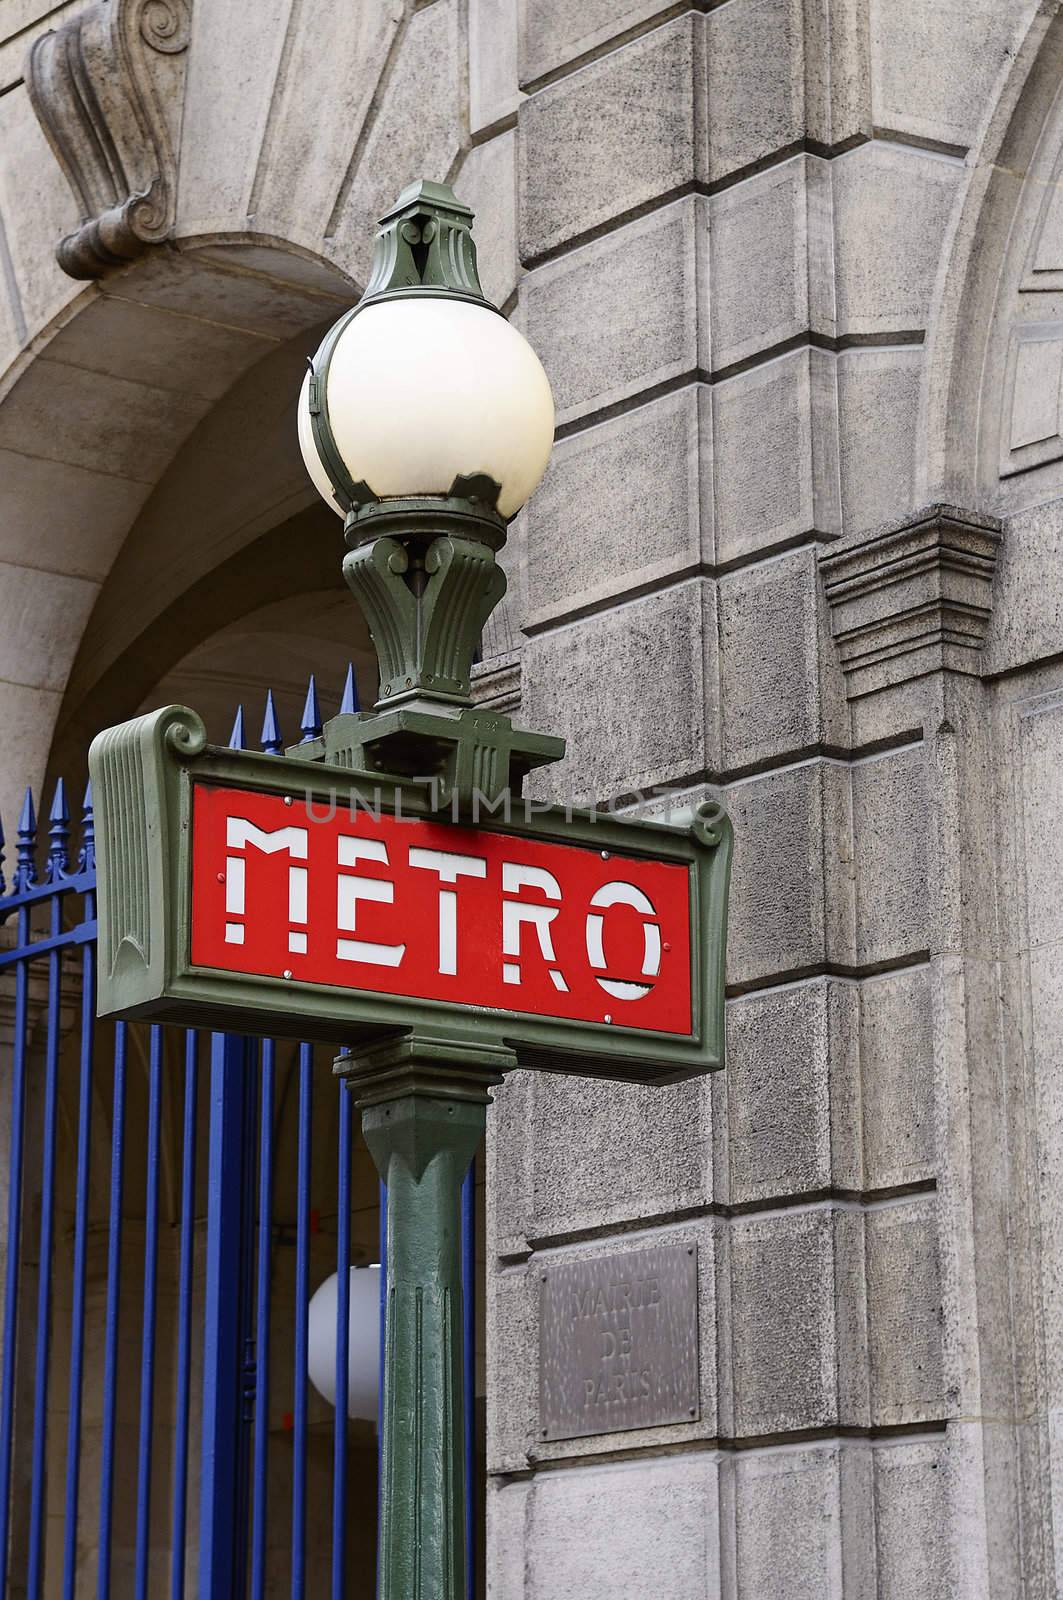 Red and green metro sign in Paris France